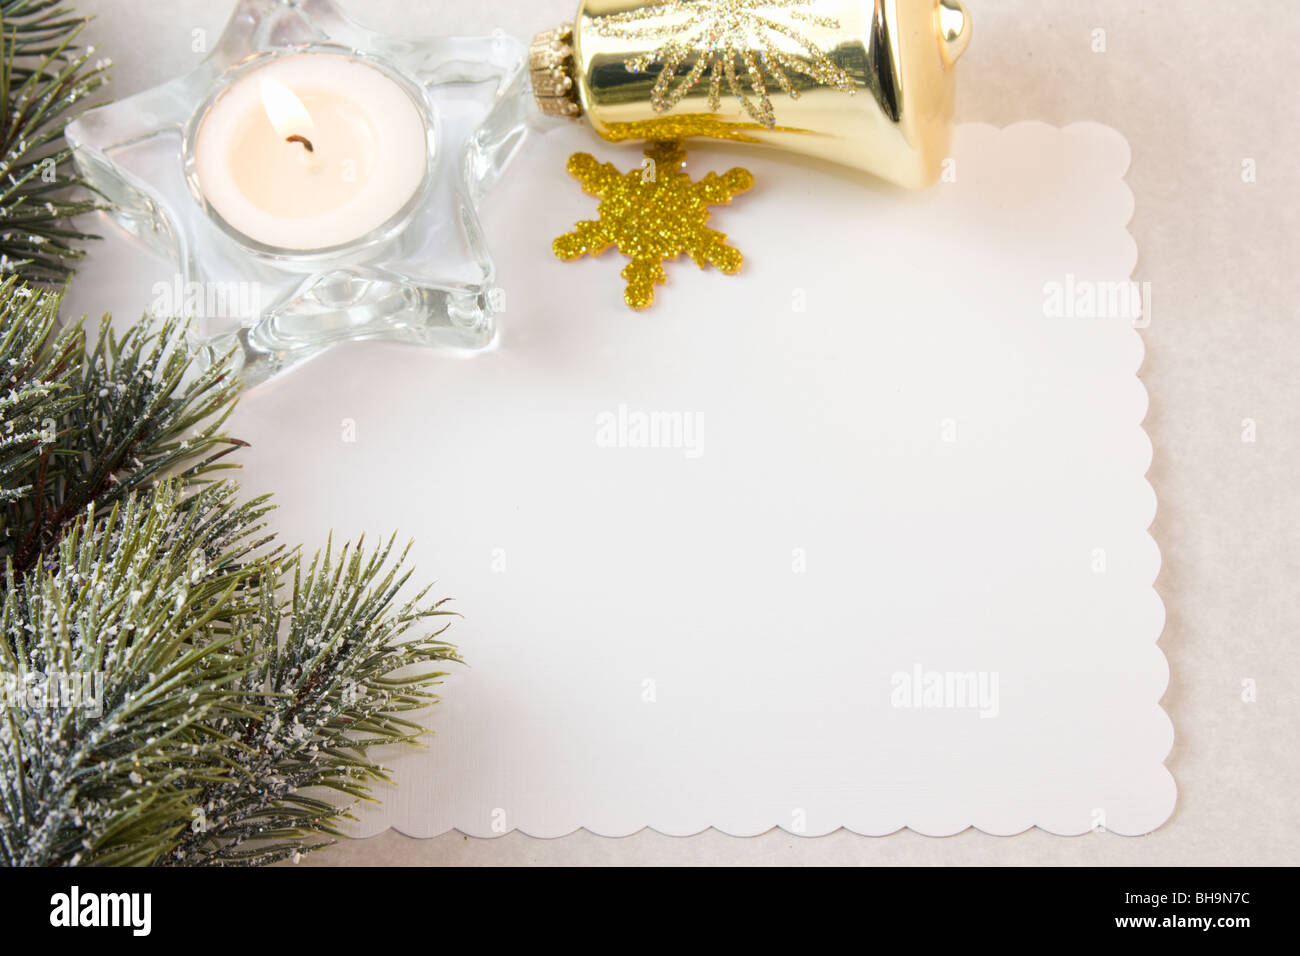 Christmas tea light with gold decorations, fir branch, and copy space Stock Photo